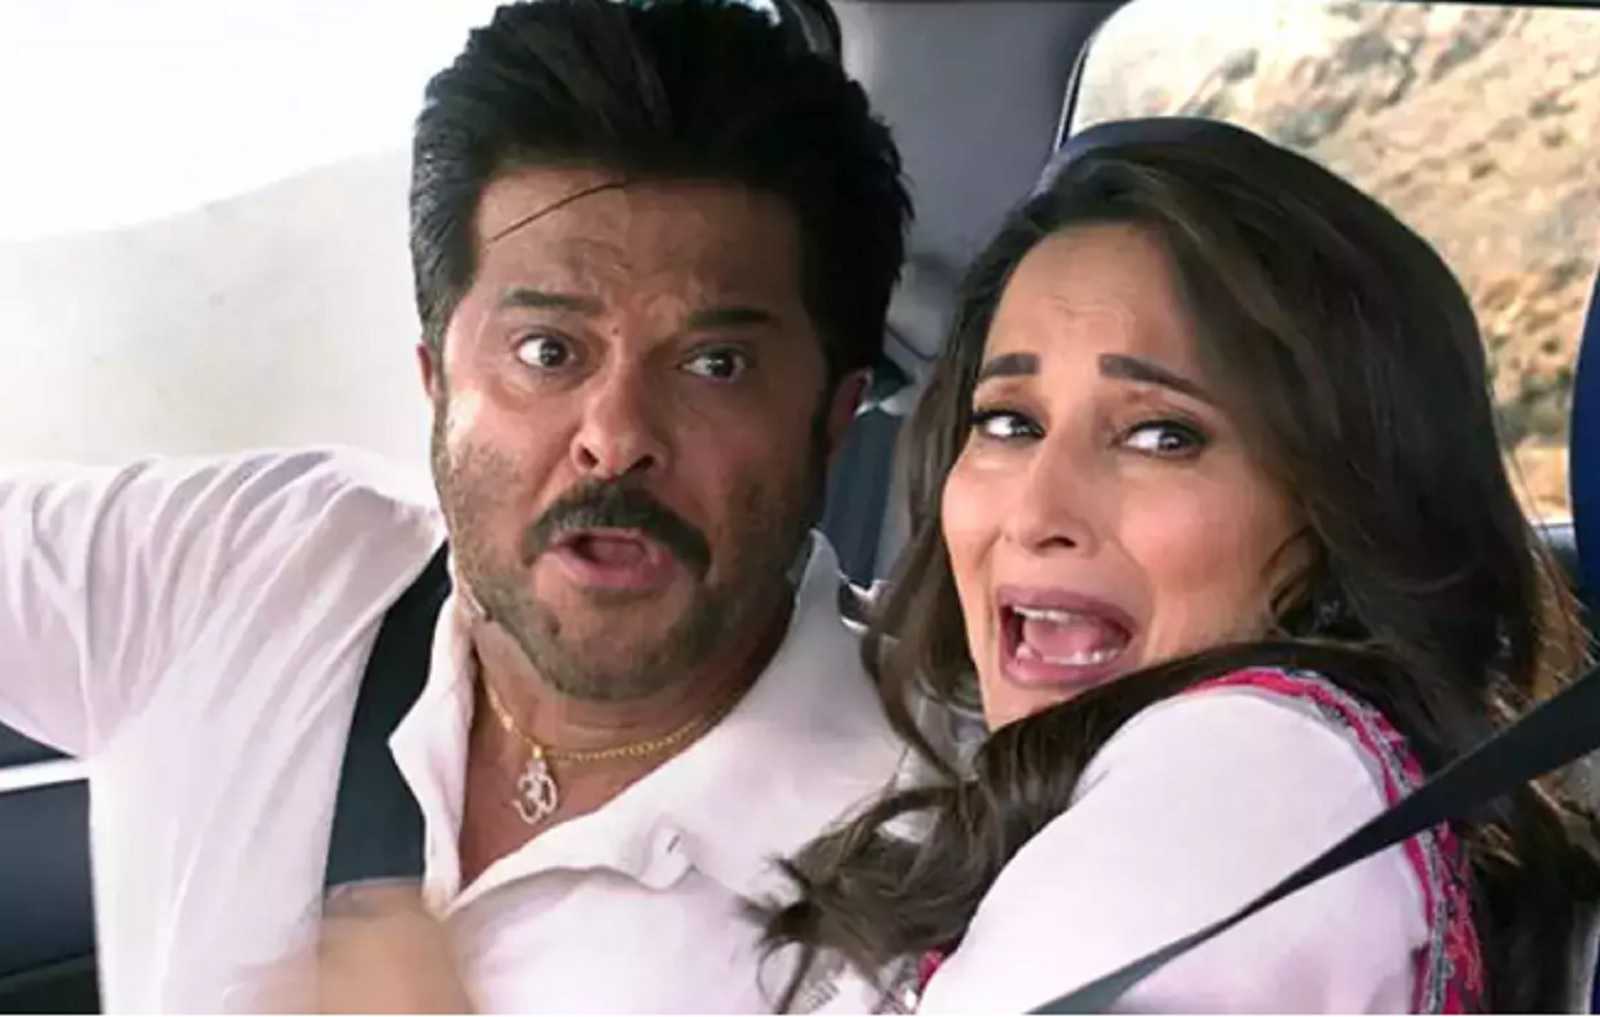 Dhamaal 4: Madhuri Dixit, Anil Kapoor to reunite with Ajay Devgn in fourth installment of Indra Kumar's comedy franchise